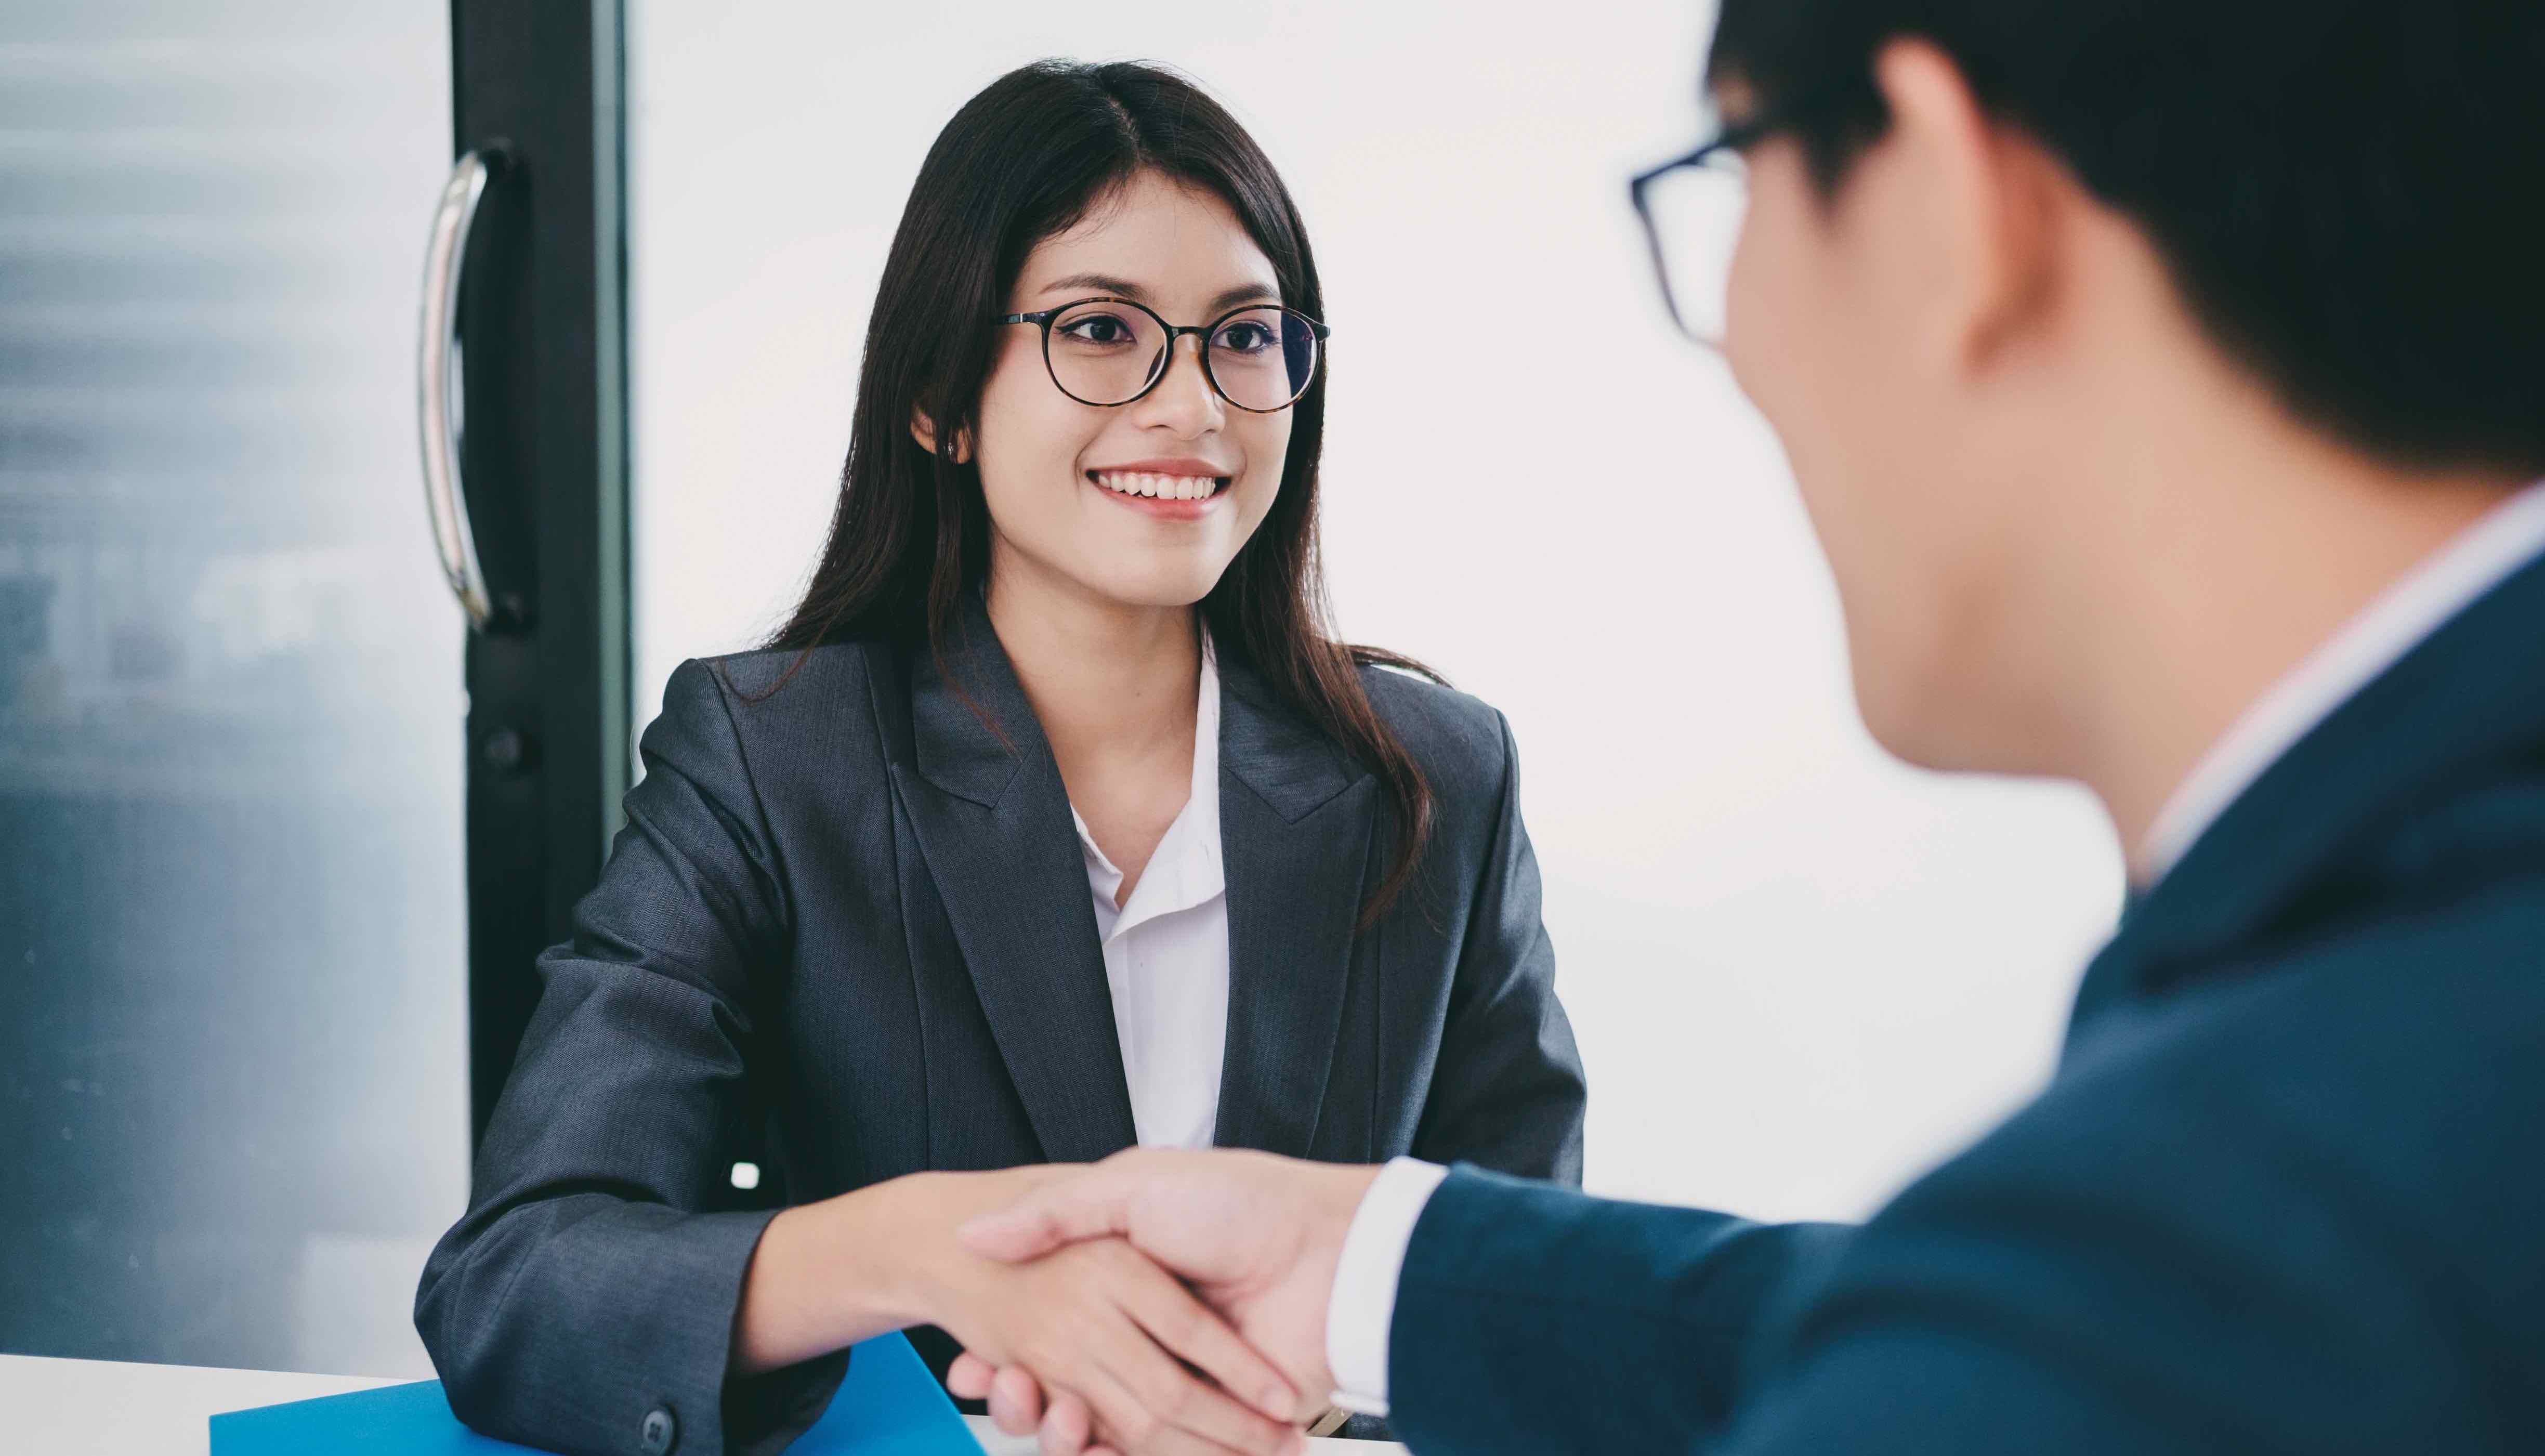 shaking-hands-with-trusted-advisor-to-find-job-after-college